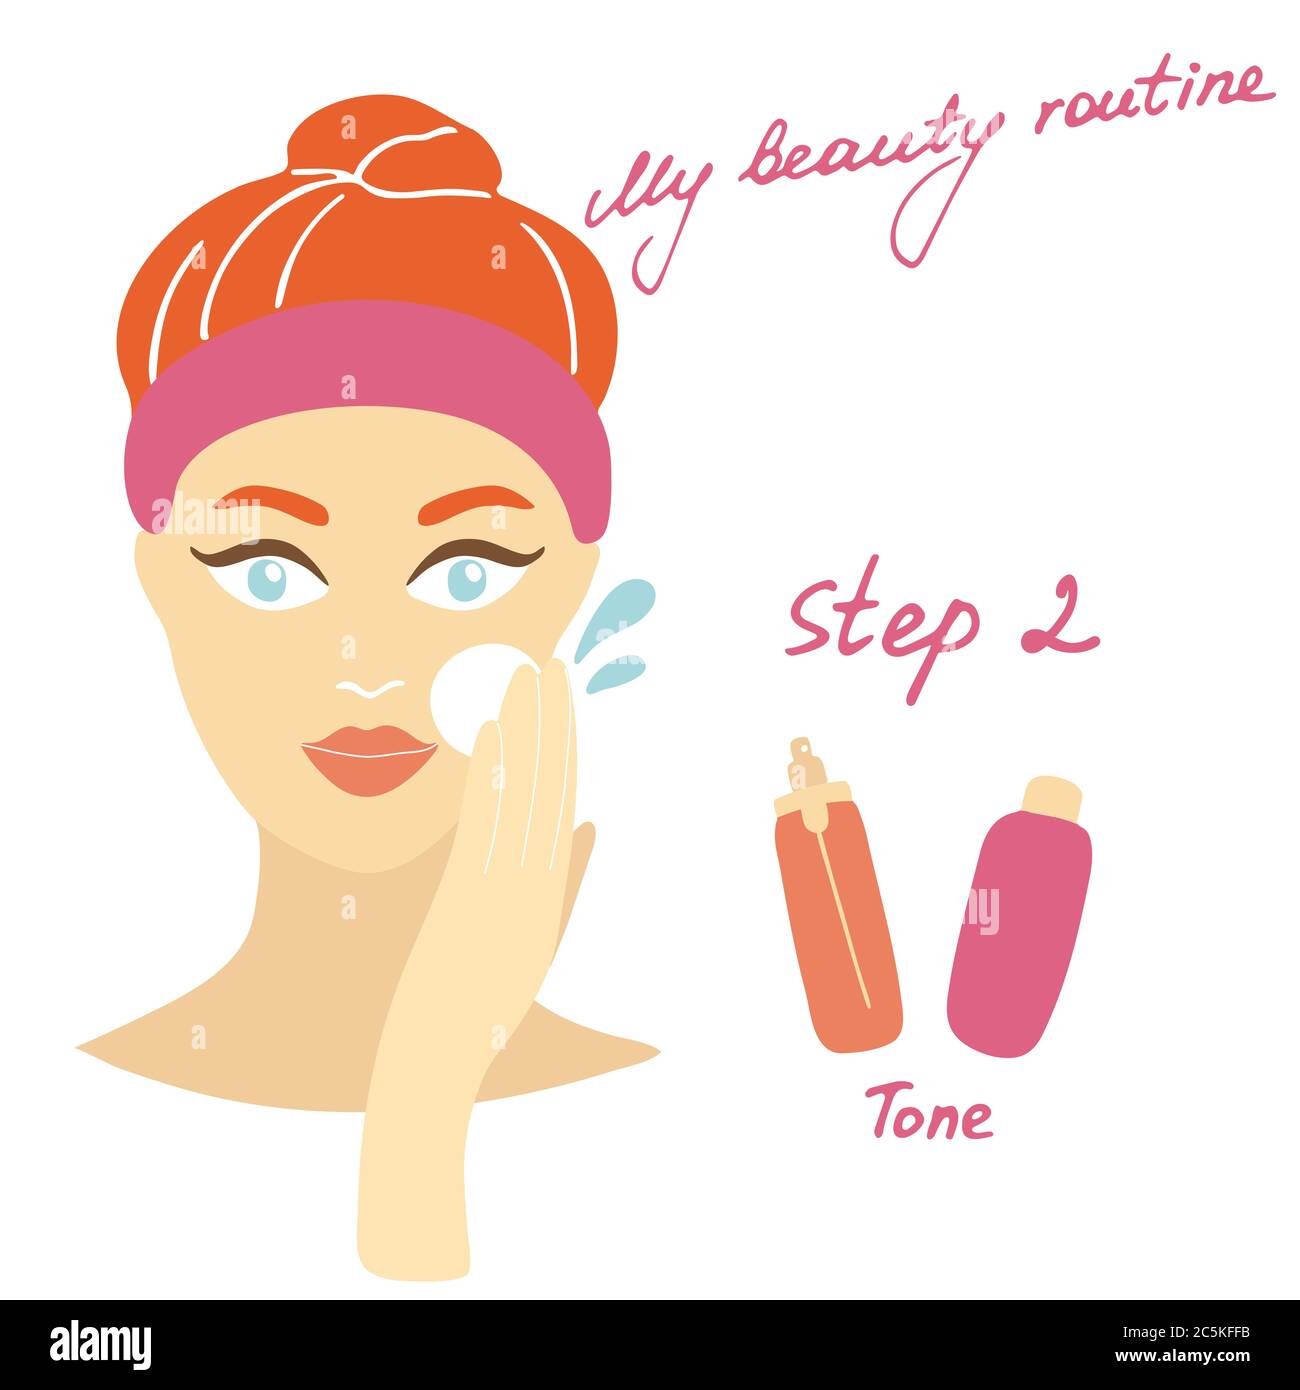 My daily routine. Skin care vector illustration. Correct order to apply skin care products. Step 2 Tone. Stock Vector